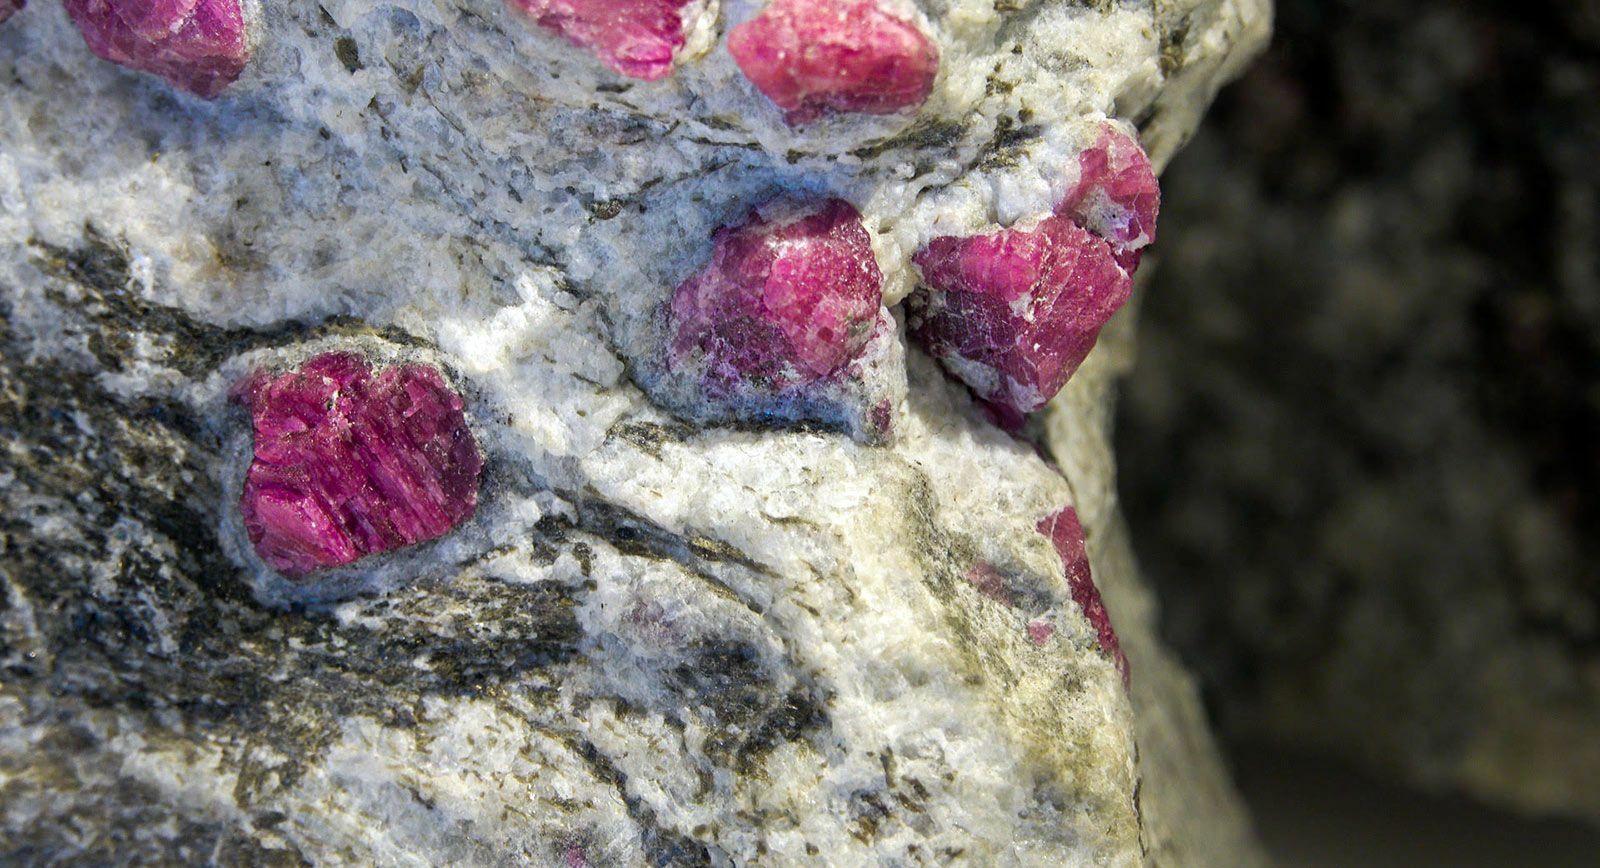 Greenland Ruby: A brand new corundum that will soon be globally recognised